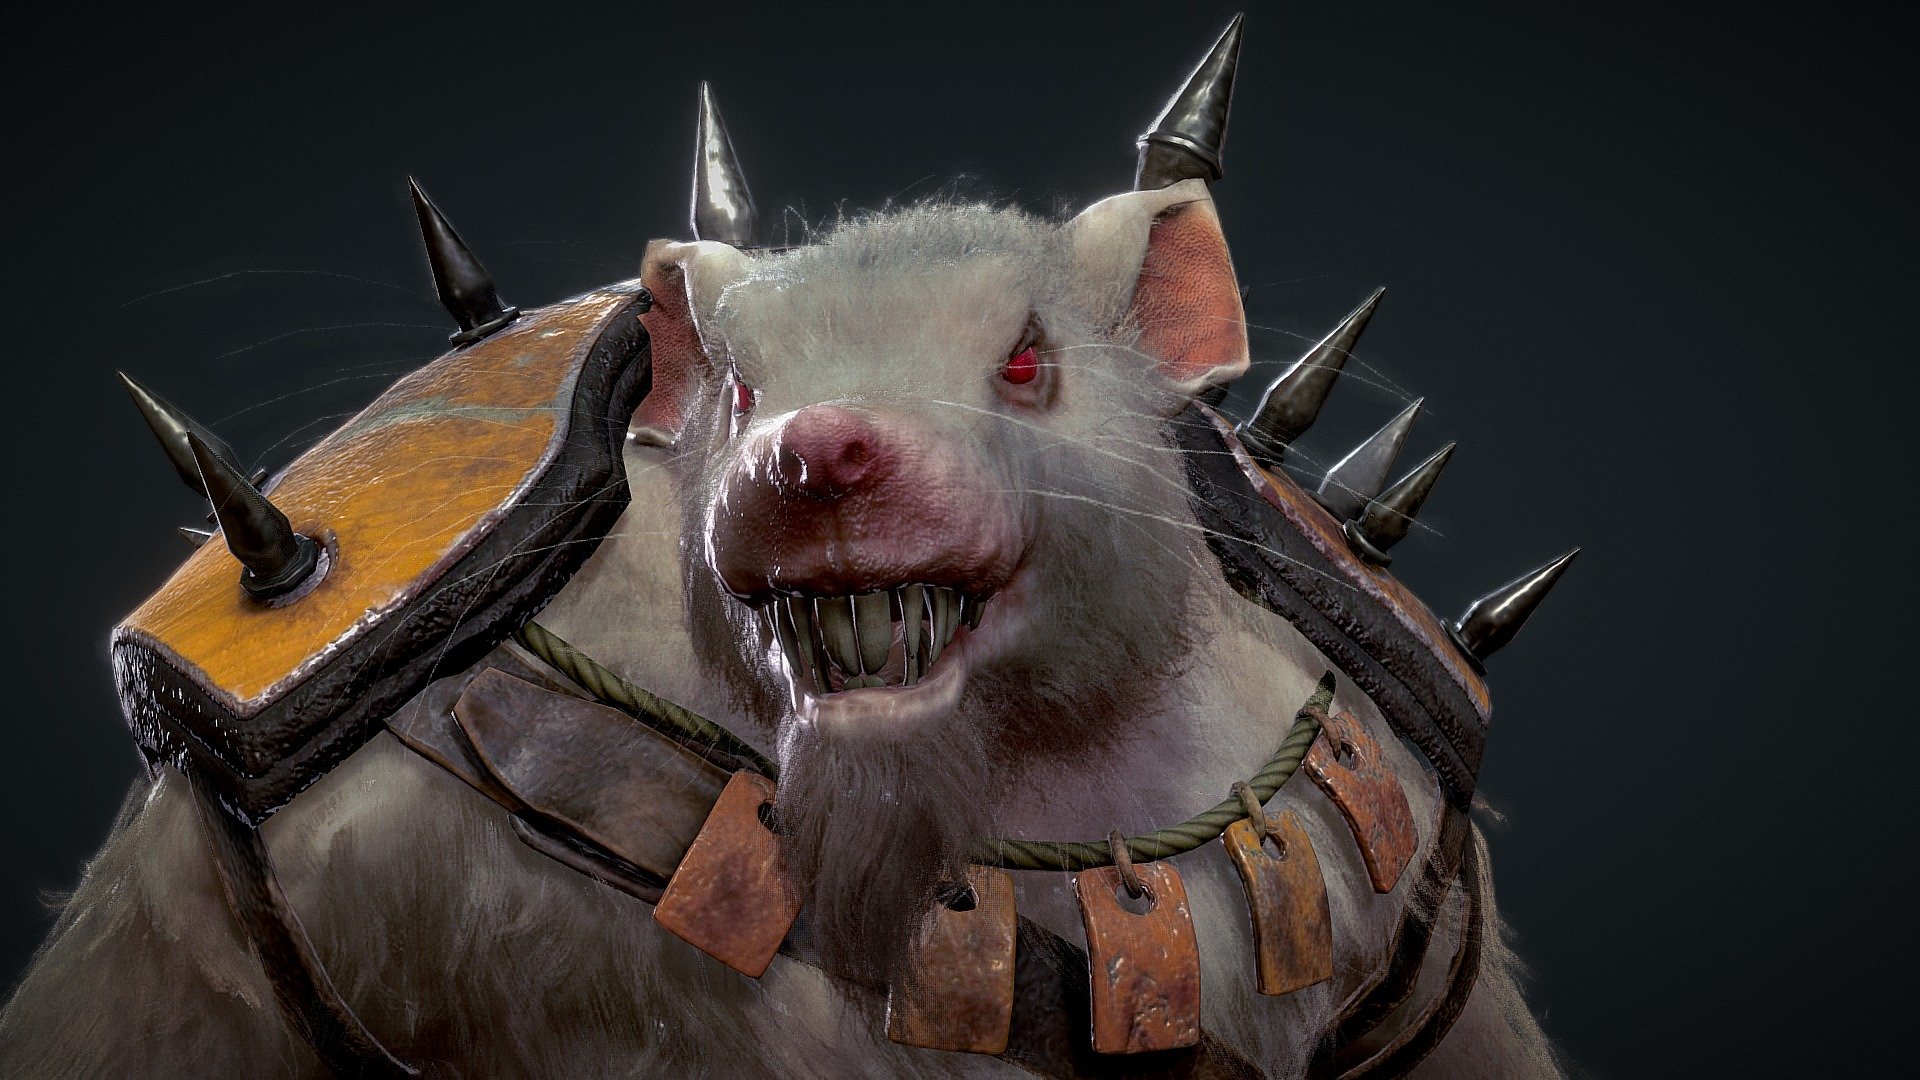 The Rat Maurauders from the Garbage Planet are able to create armor for themselves from any remnants of scrap metal.

This character was originaly developed by Alexandra Malygina (Fler) for the Grand Space Opera Concept Art challenge for Artstation. You can view other pieces from her on her artstation page: https://www.artstation.com/fler

I made the model for the Realtime Production challenge. It was a tough experience indeed. You can view the whole progress on my submission here: https://www.artstation.com/contests/grand-space-opera-light-age/challenges/96/submissions/60002 

Software used: Blender, ZBrush, Marvelous Designer, Substance painter, Photoshop

Hope you like it. Cheers 3d model